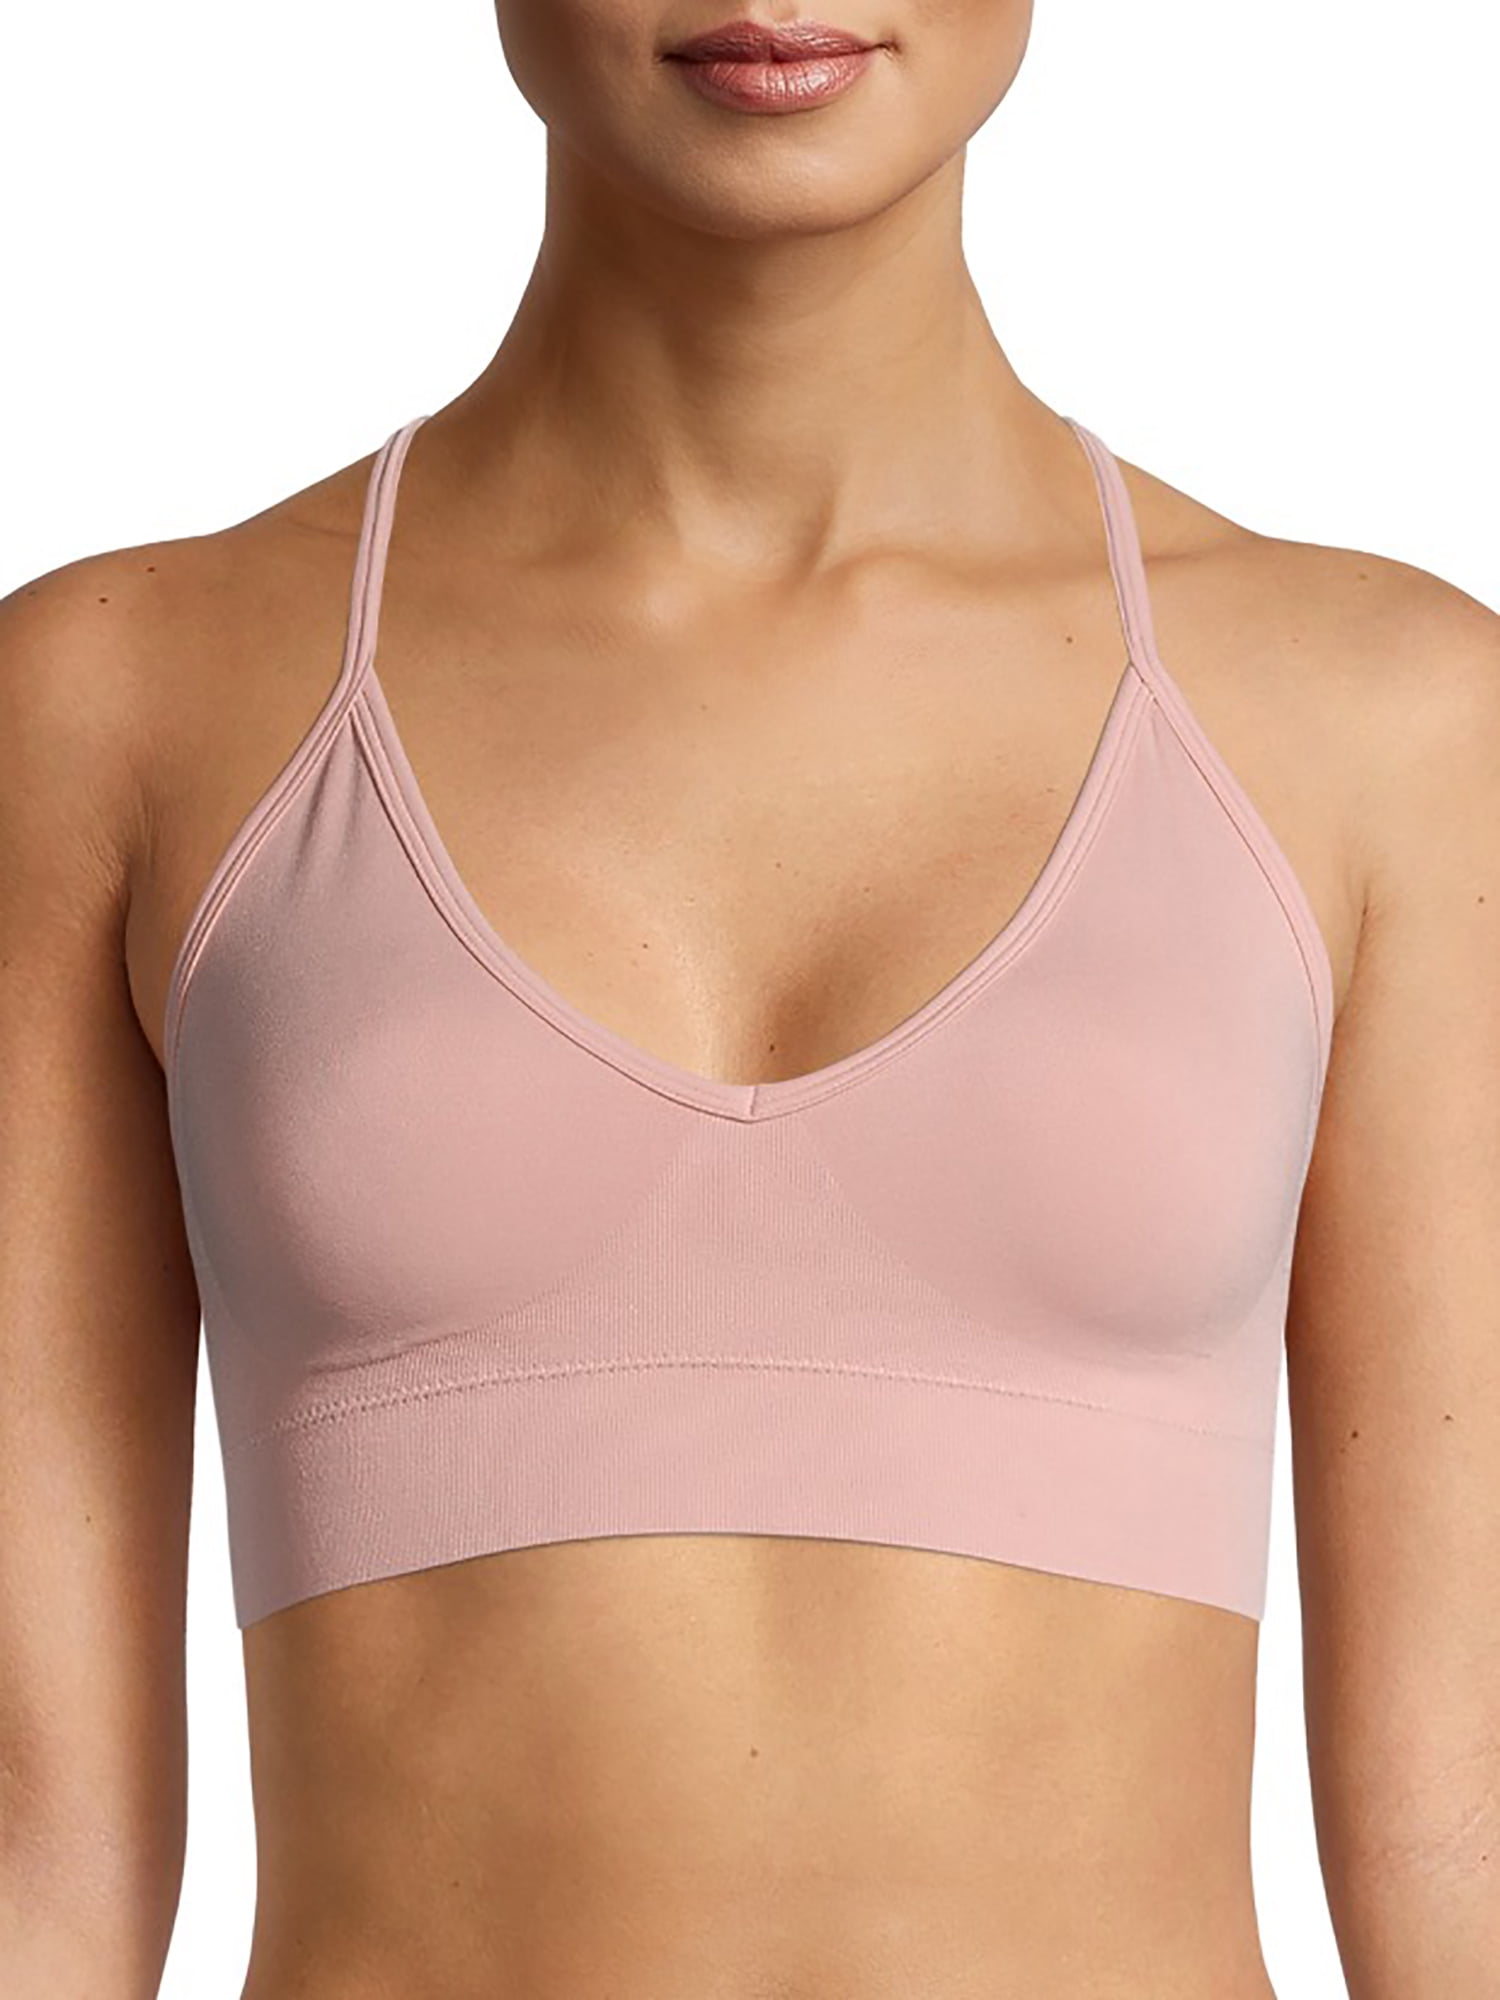 Details about   Seamless Plungee Bralette Bra Size M Wirefree Convertible Pink Secret Treasures 